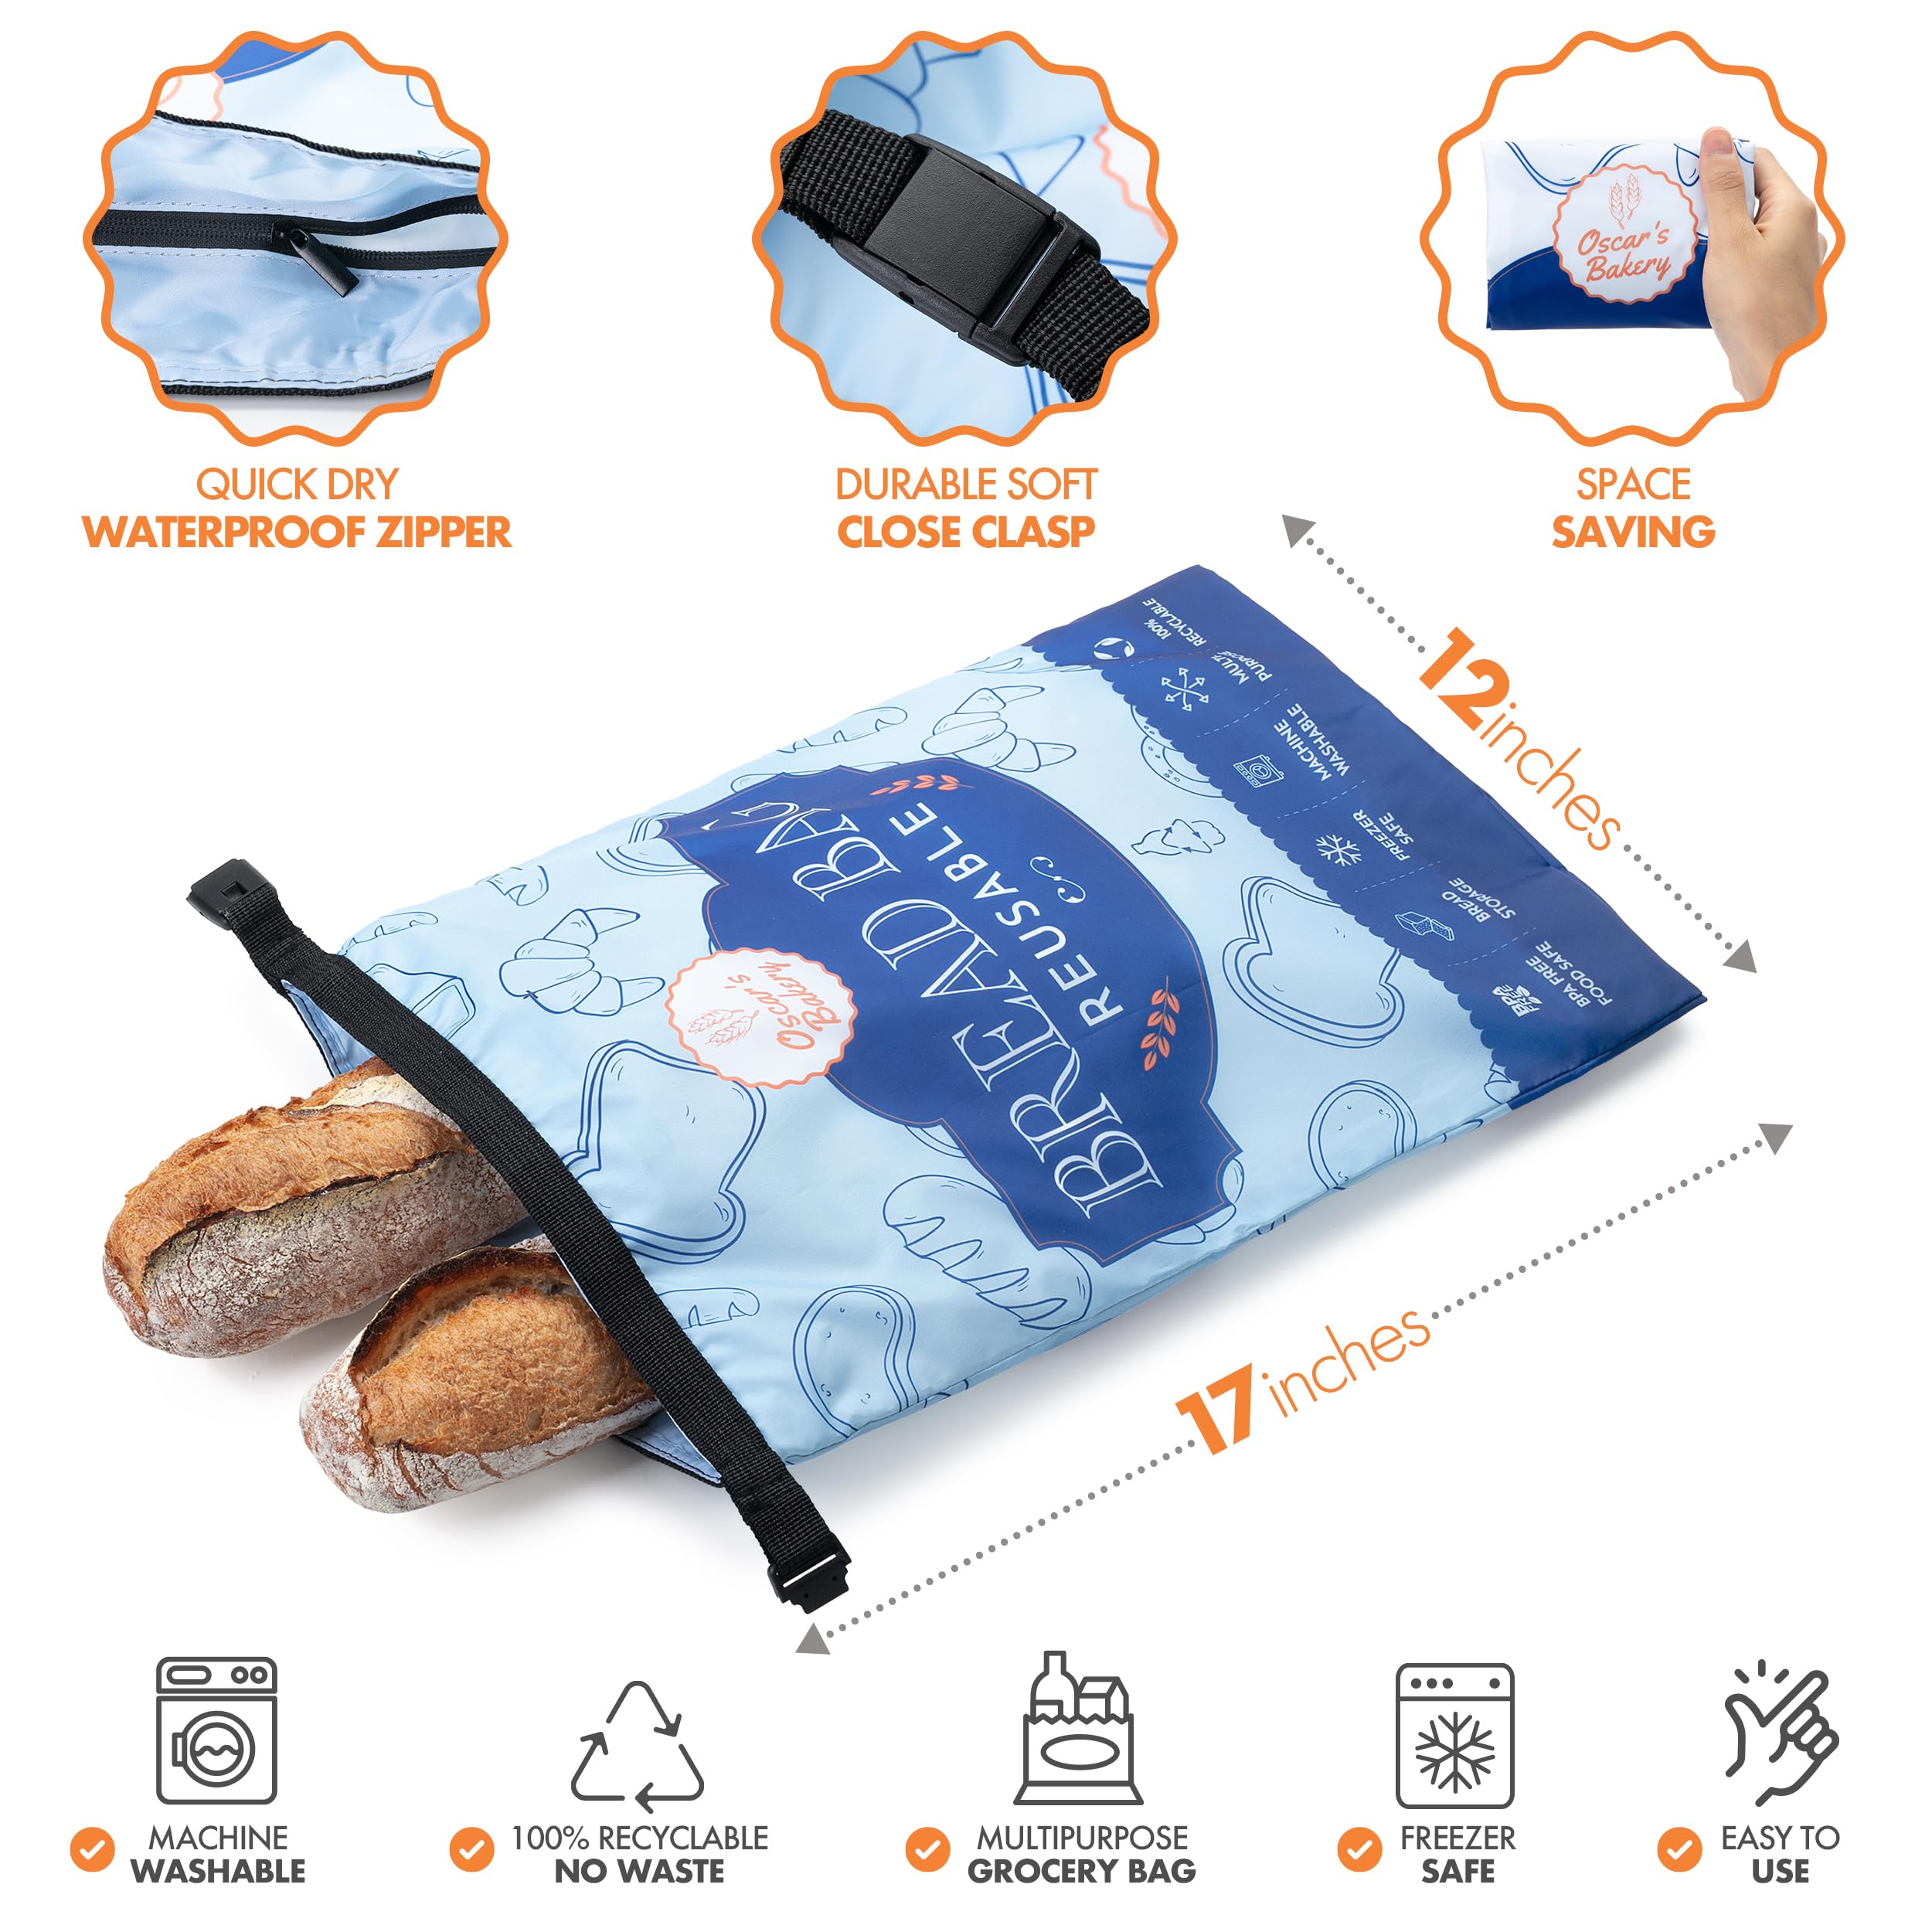 Reusable Bread Bags for Homemade Bread- Sourdough Bread Bags- Freezer Safe, BPA-Free Homemade Bread Storage Bags- Bread storage containers Double Lining & Zipper. Classic Blue- 2 Pack- Oscar's Bakery